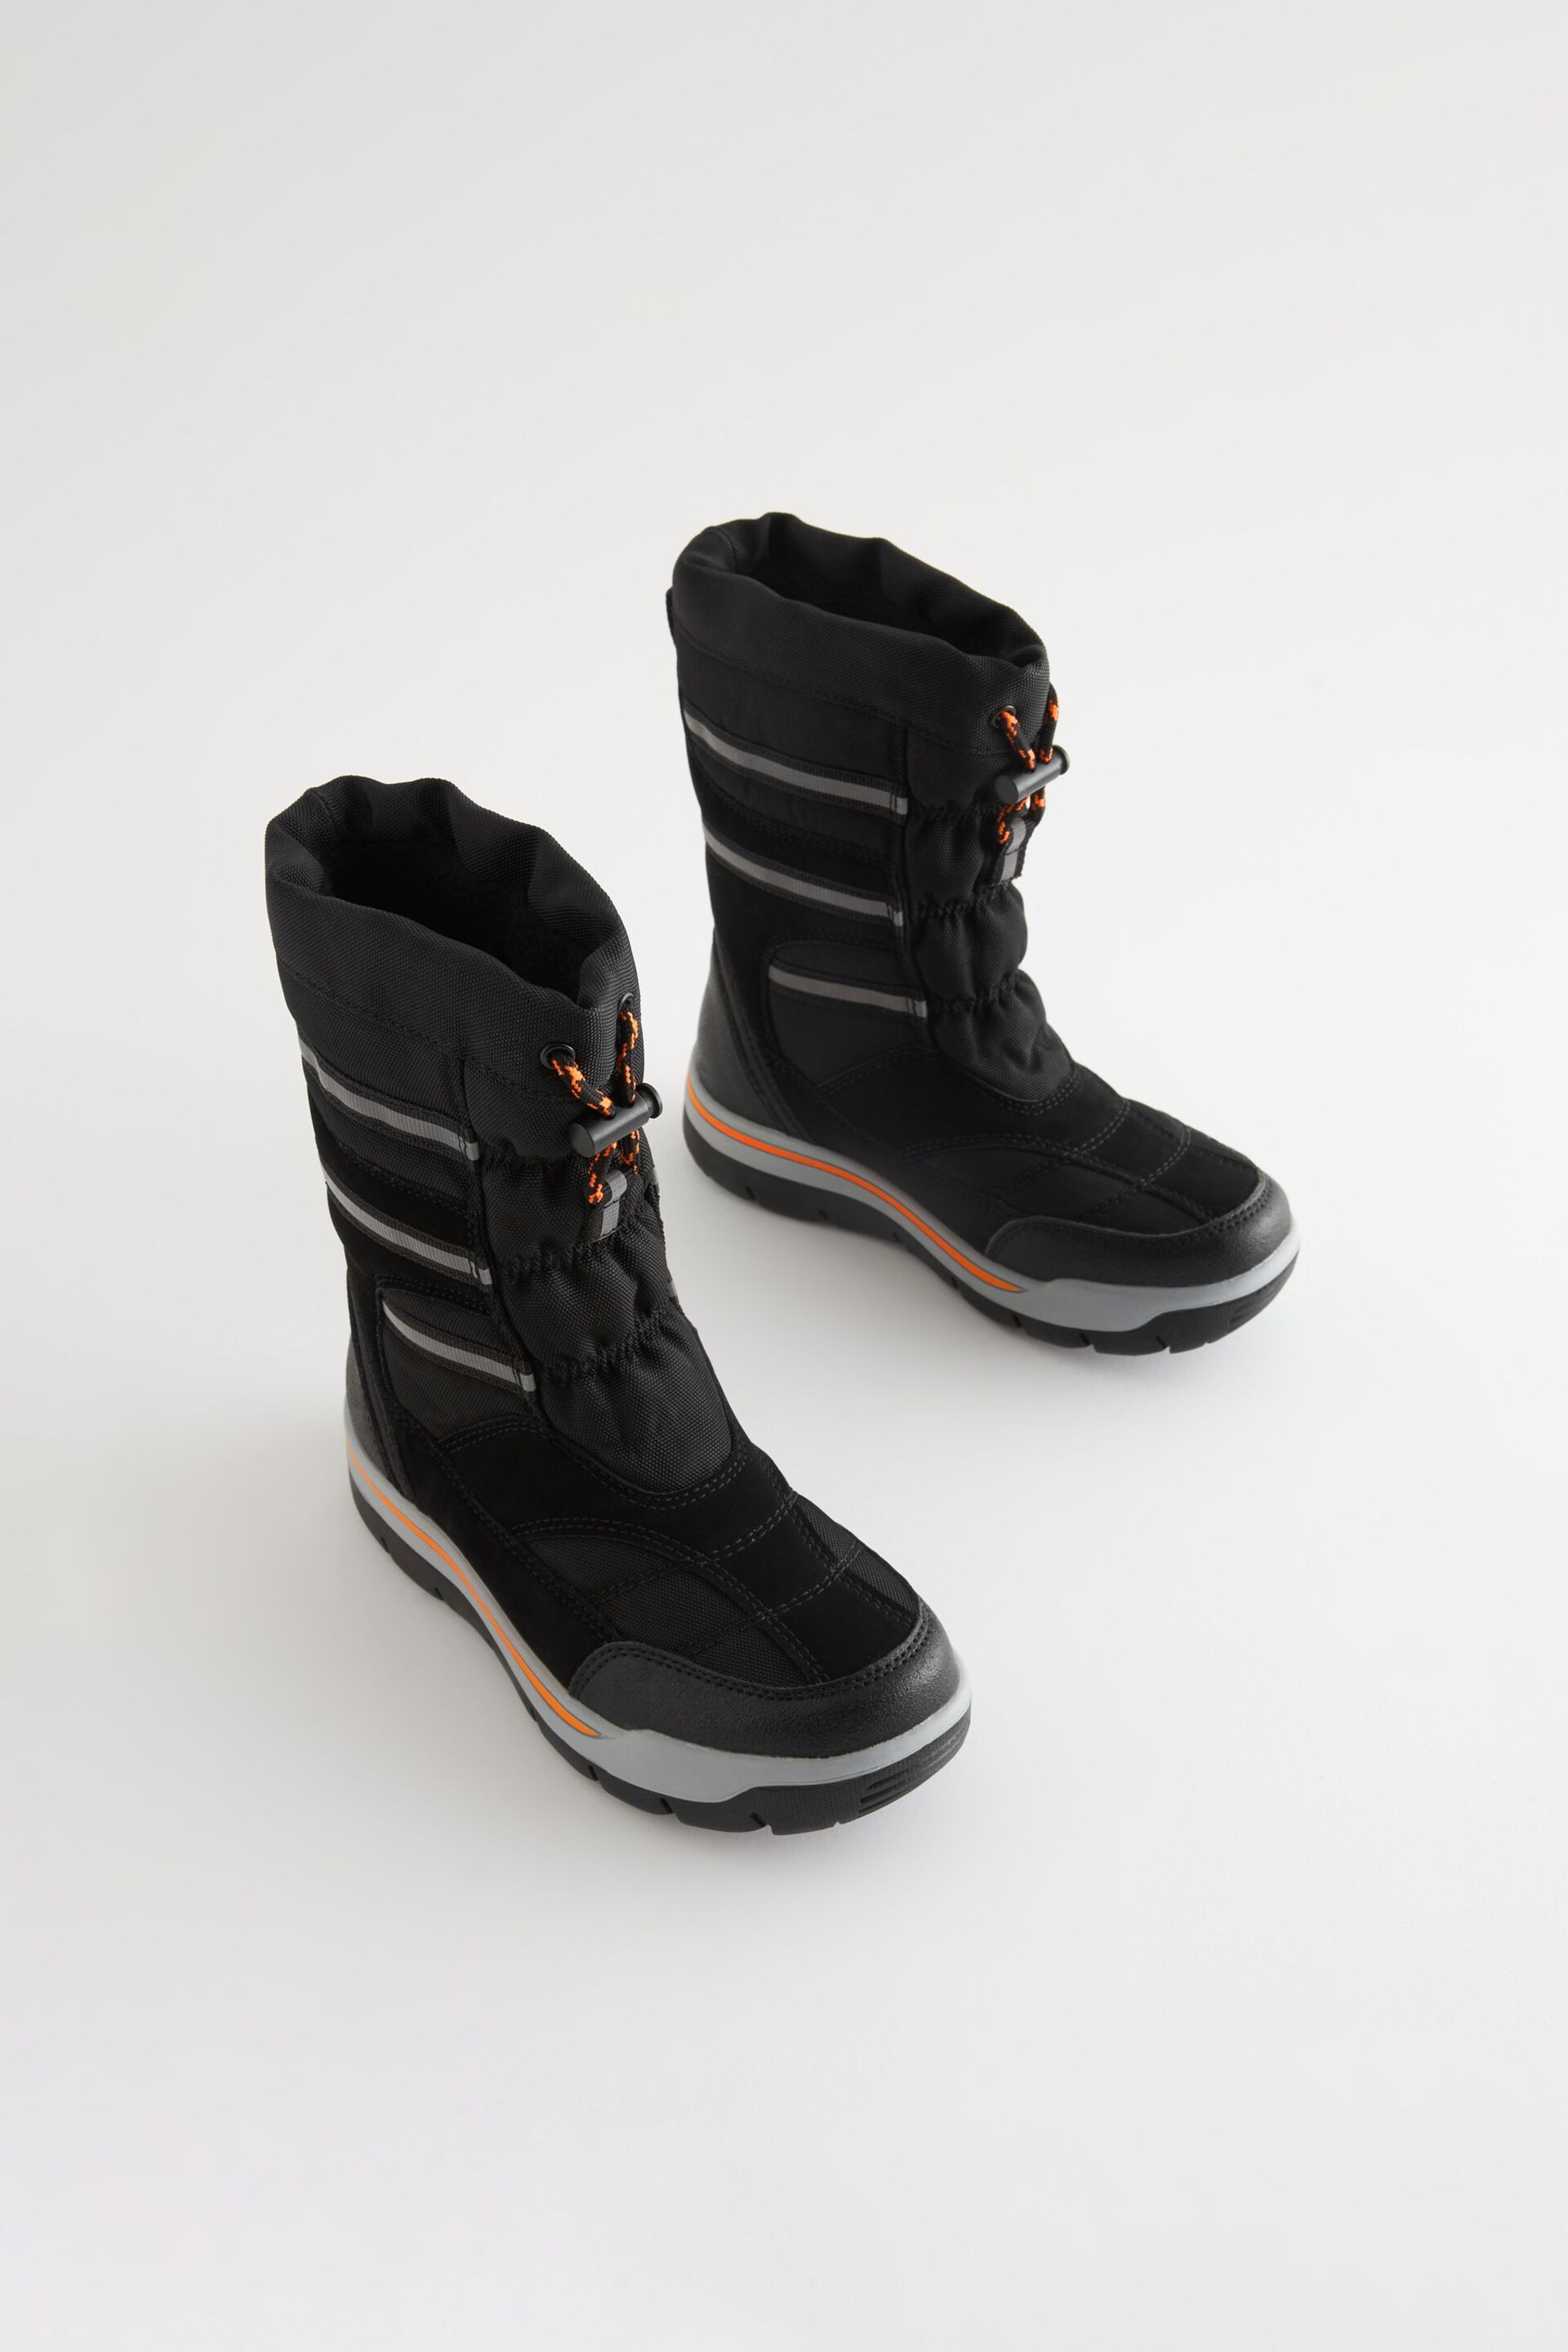 Black Water Resistant Thinsulate™ Warm Lined Snow Boots - Image 2 of 6